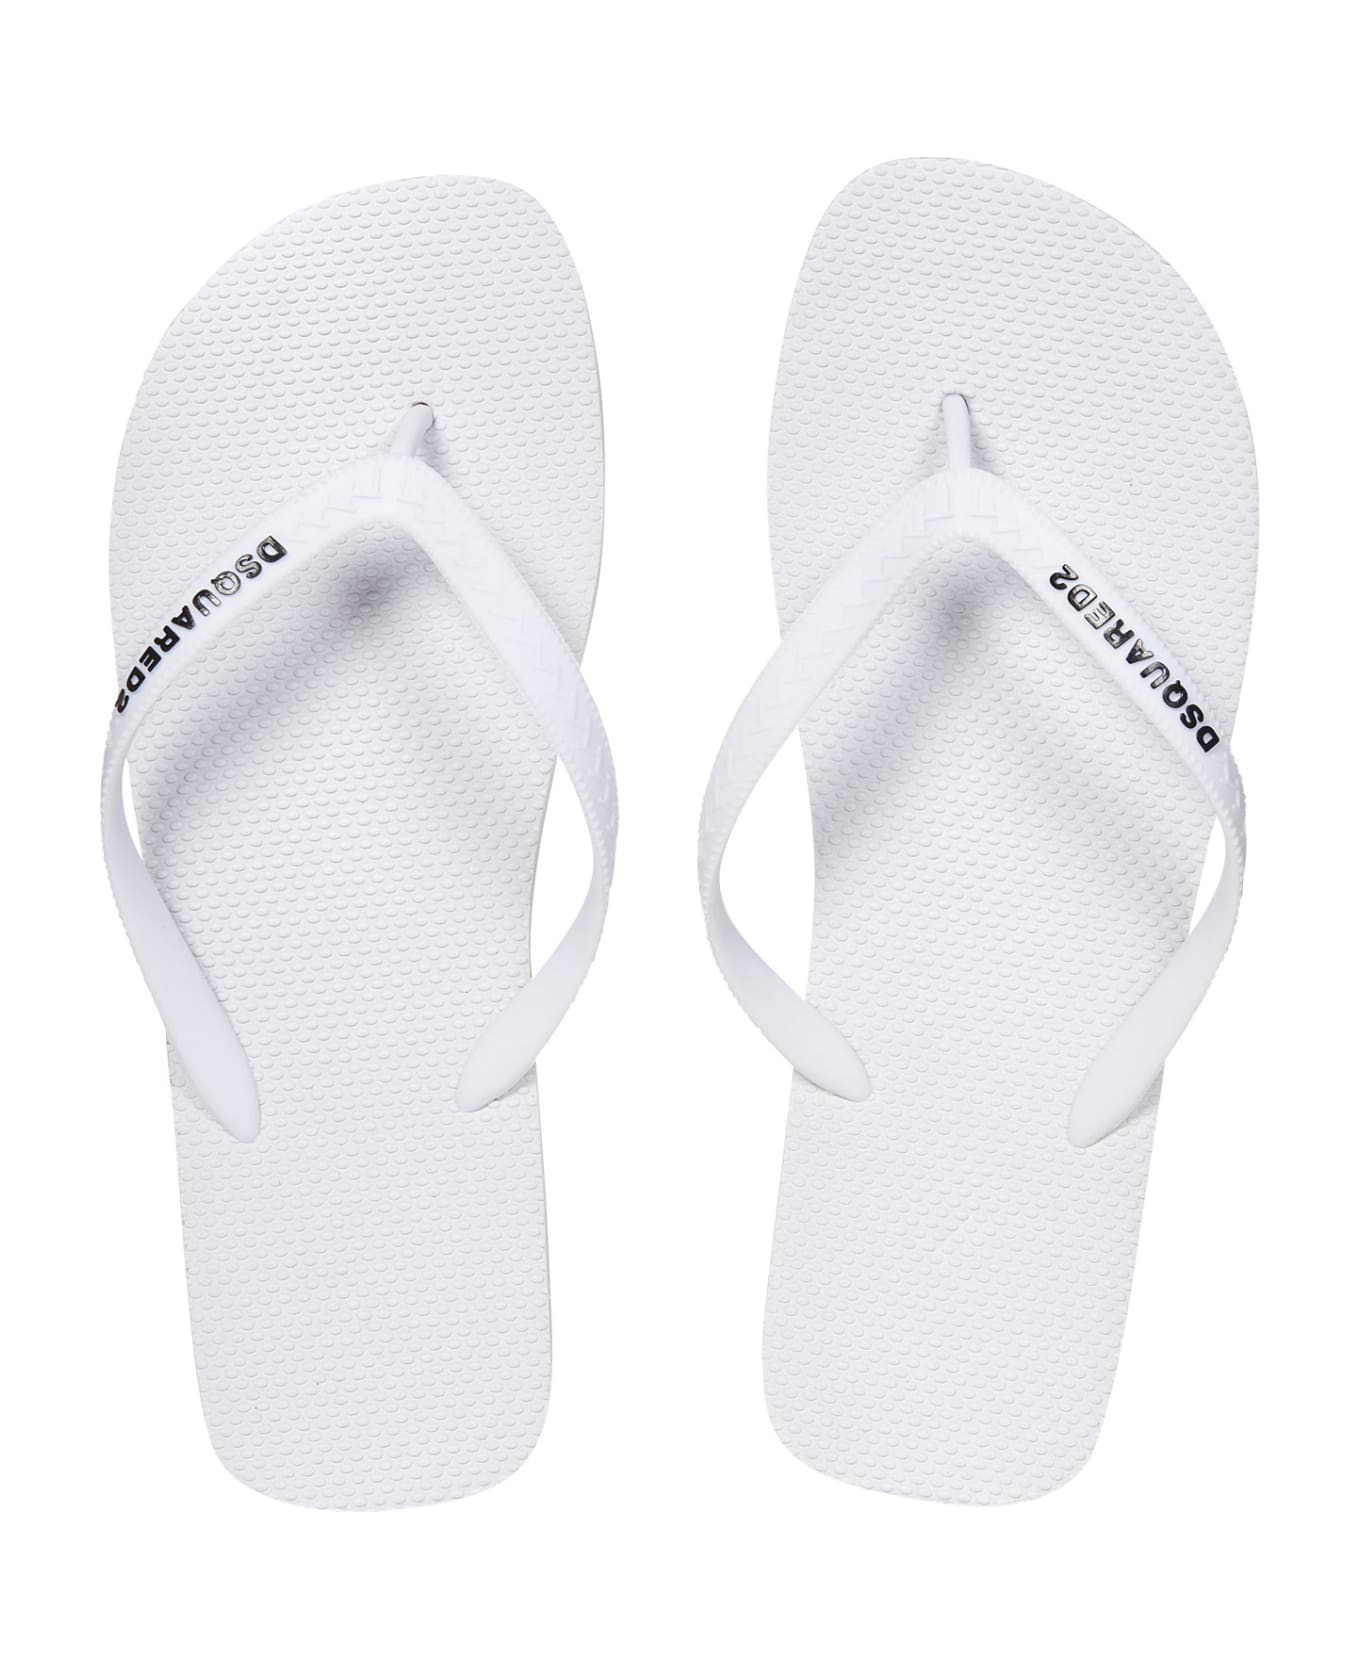 Dsquared2 Flip Flops - White その他各種シューズ